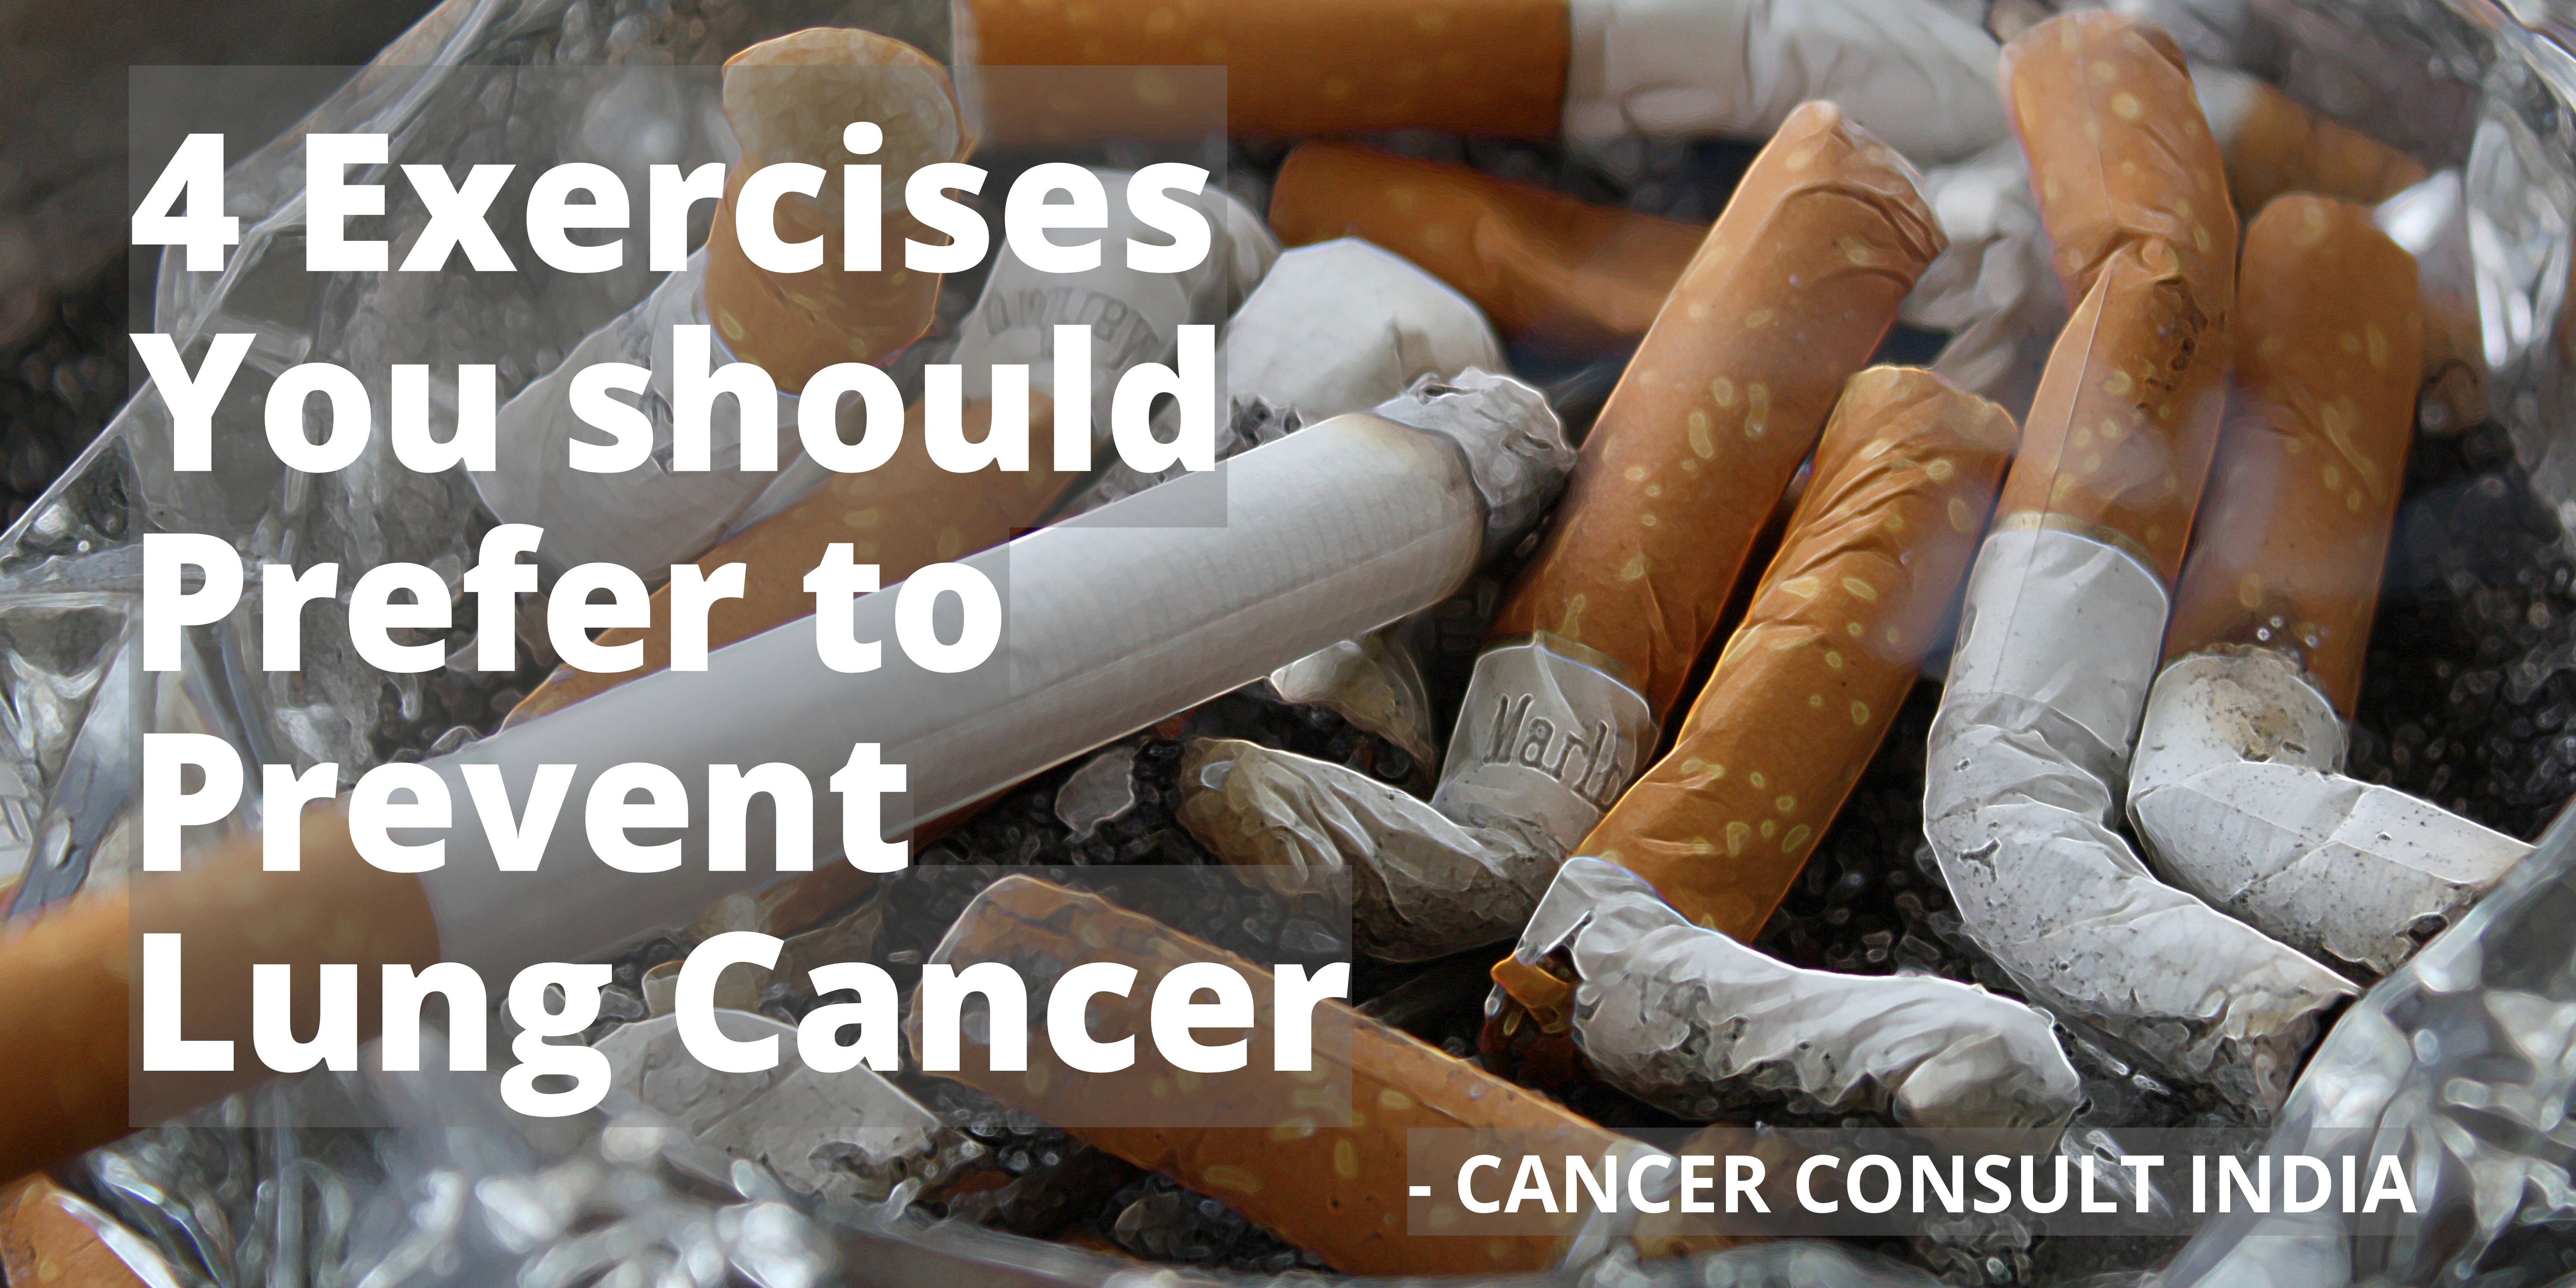 4 Exercises You should Prefer to Prevent Lung Cancer